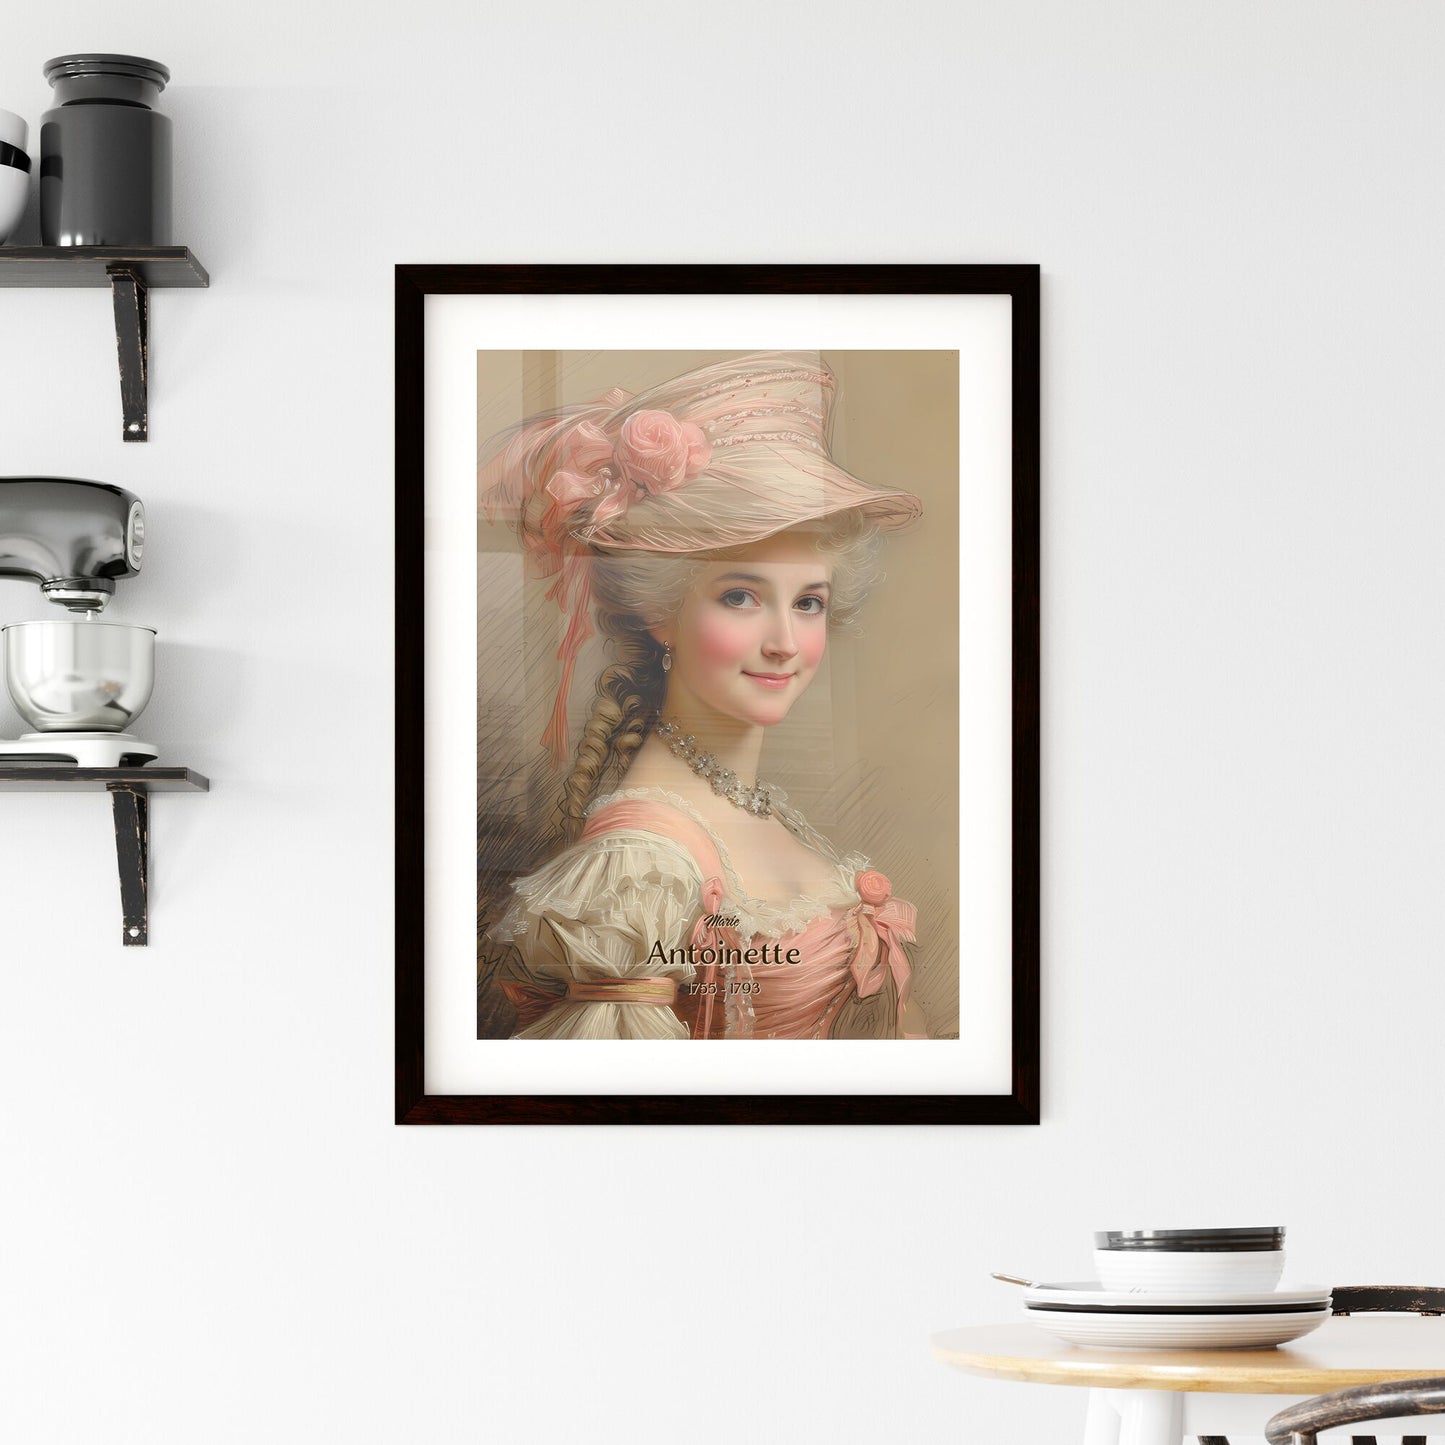 Marie, Antoinette, 1755 - 1793, A Poster of a woman in a hat Default Title